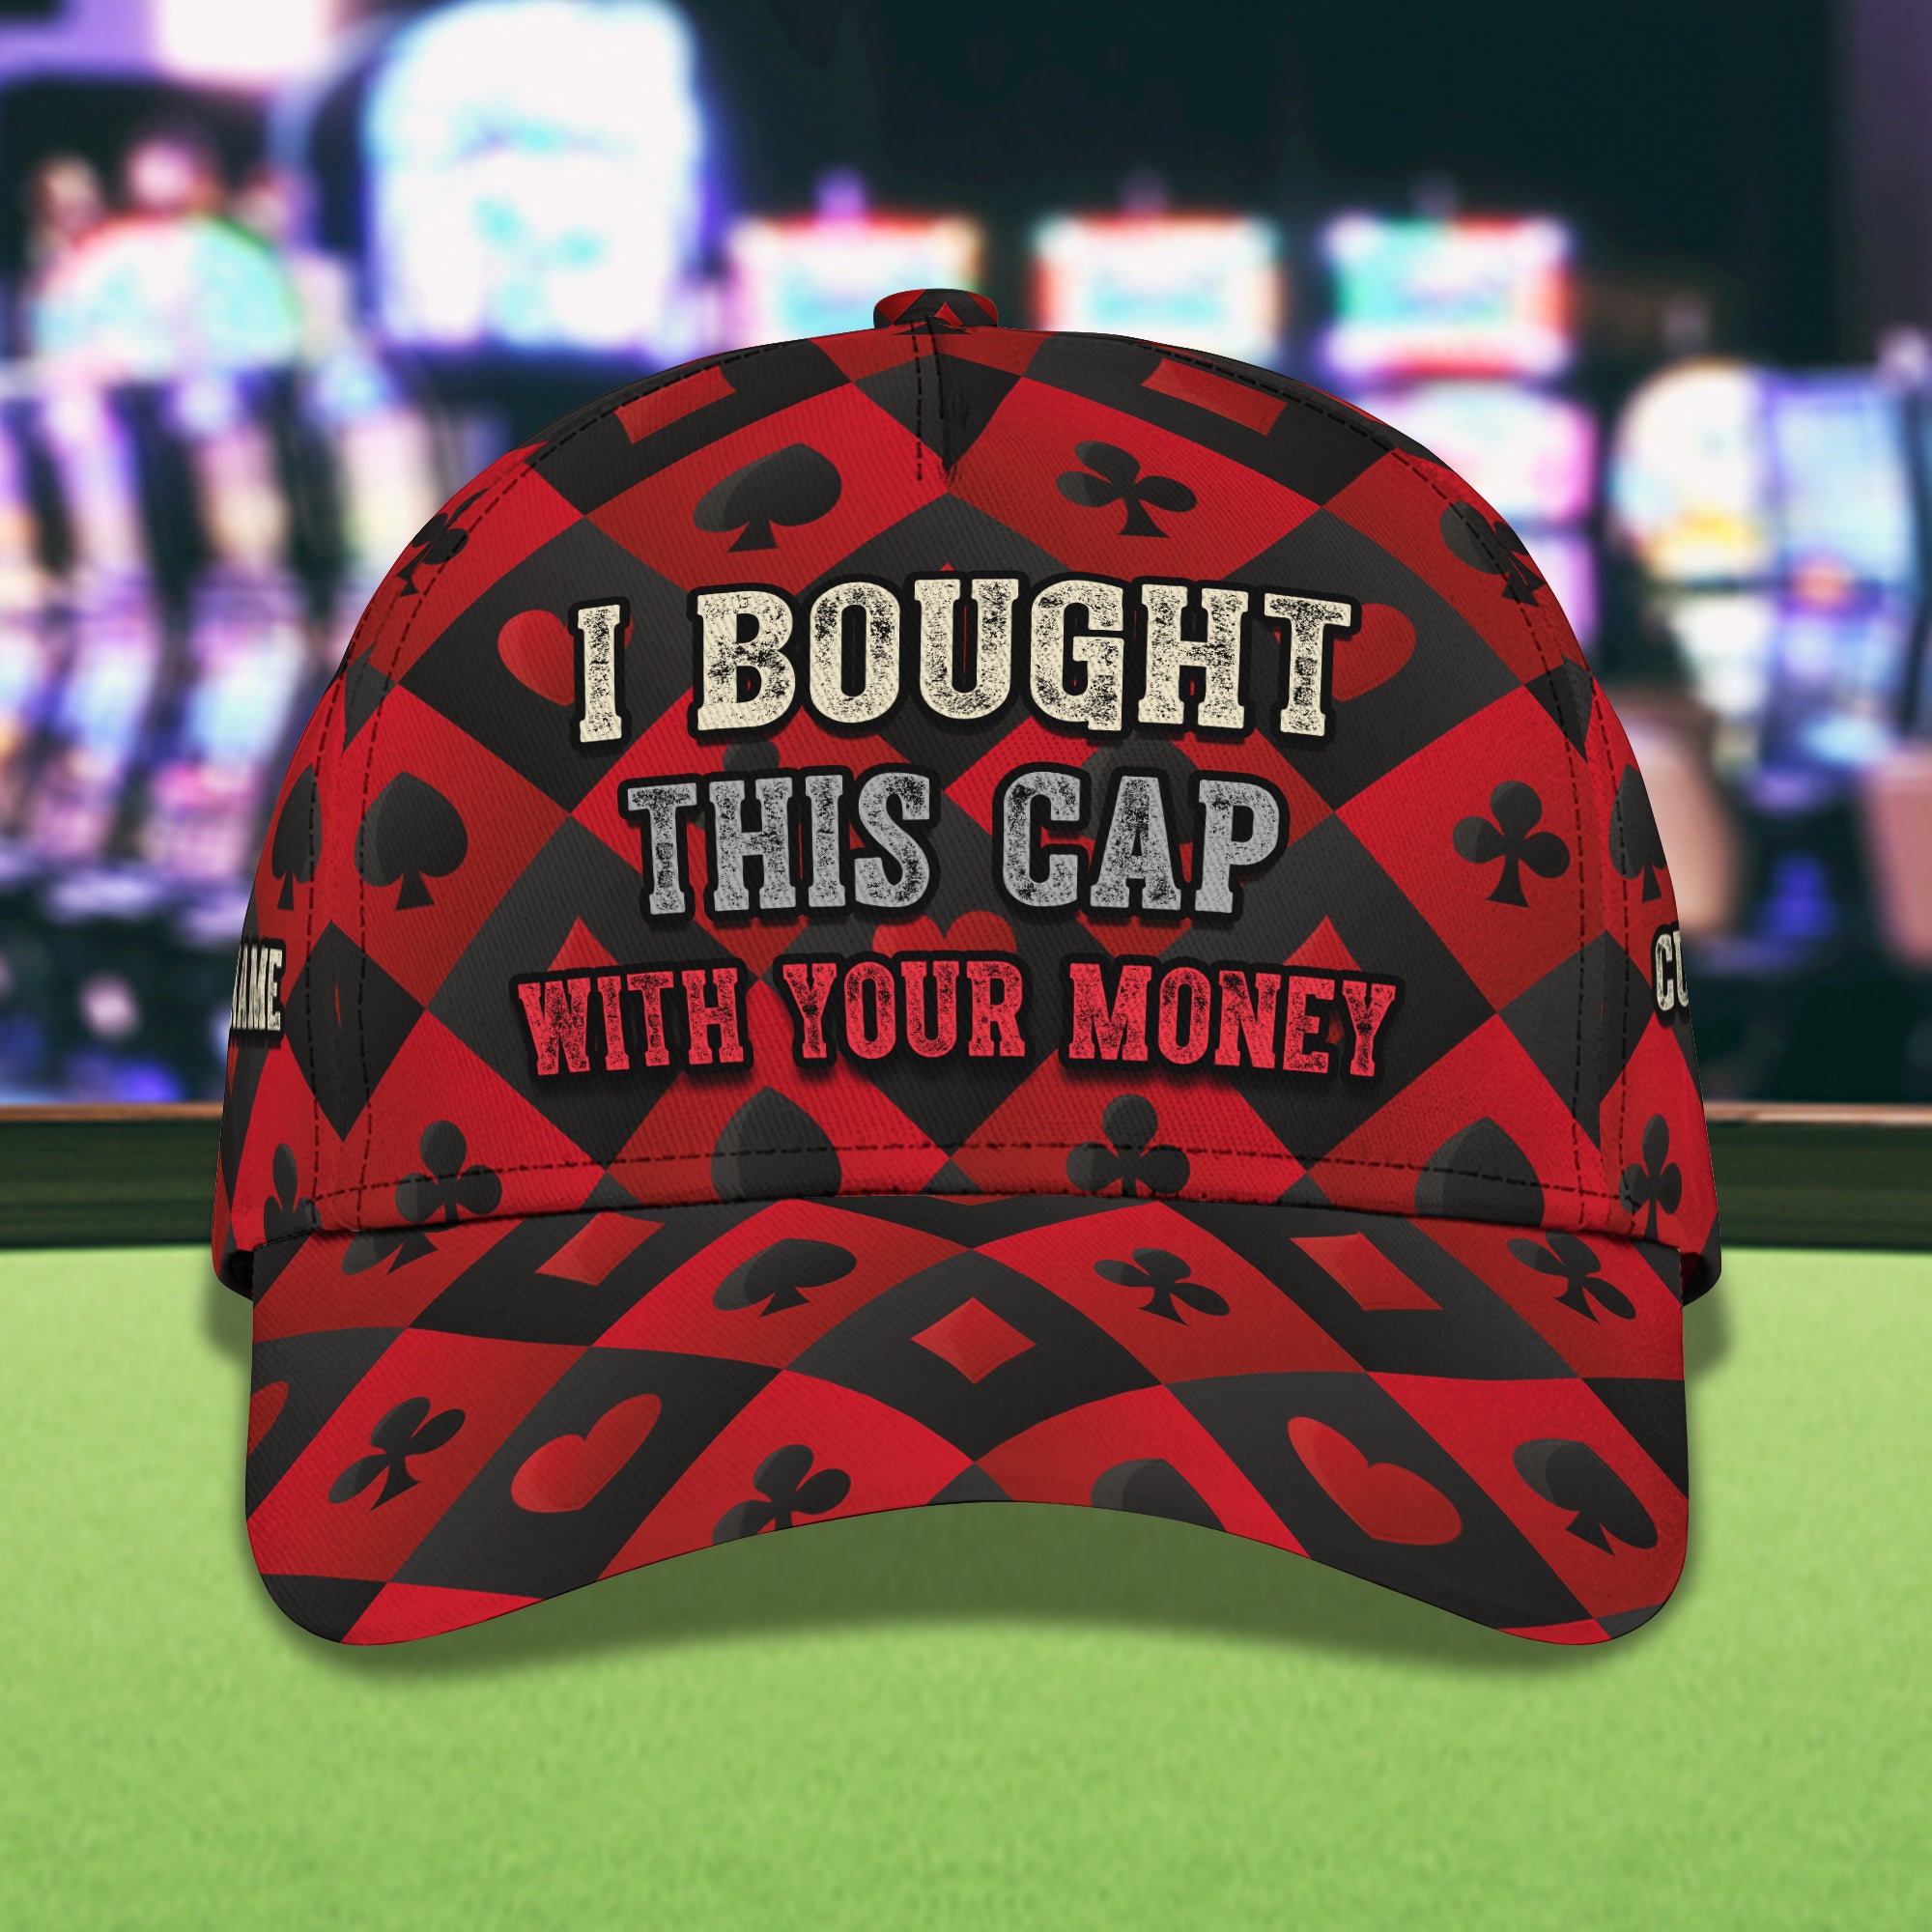 Poker Vn96 - Personalized Cap 014